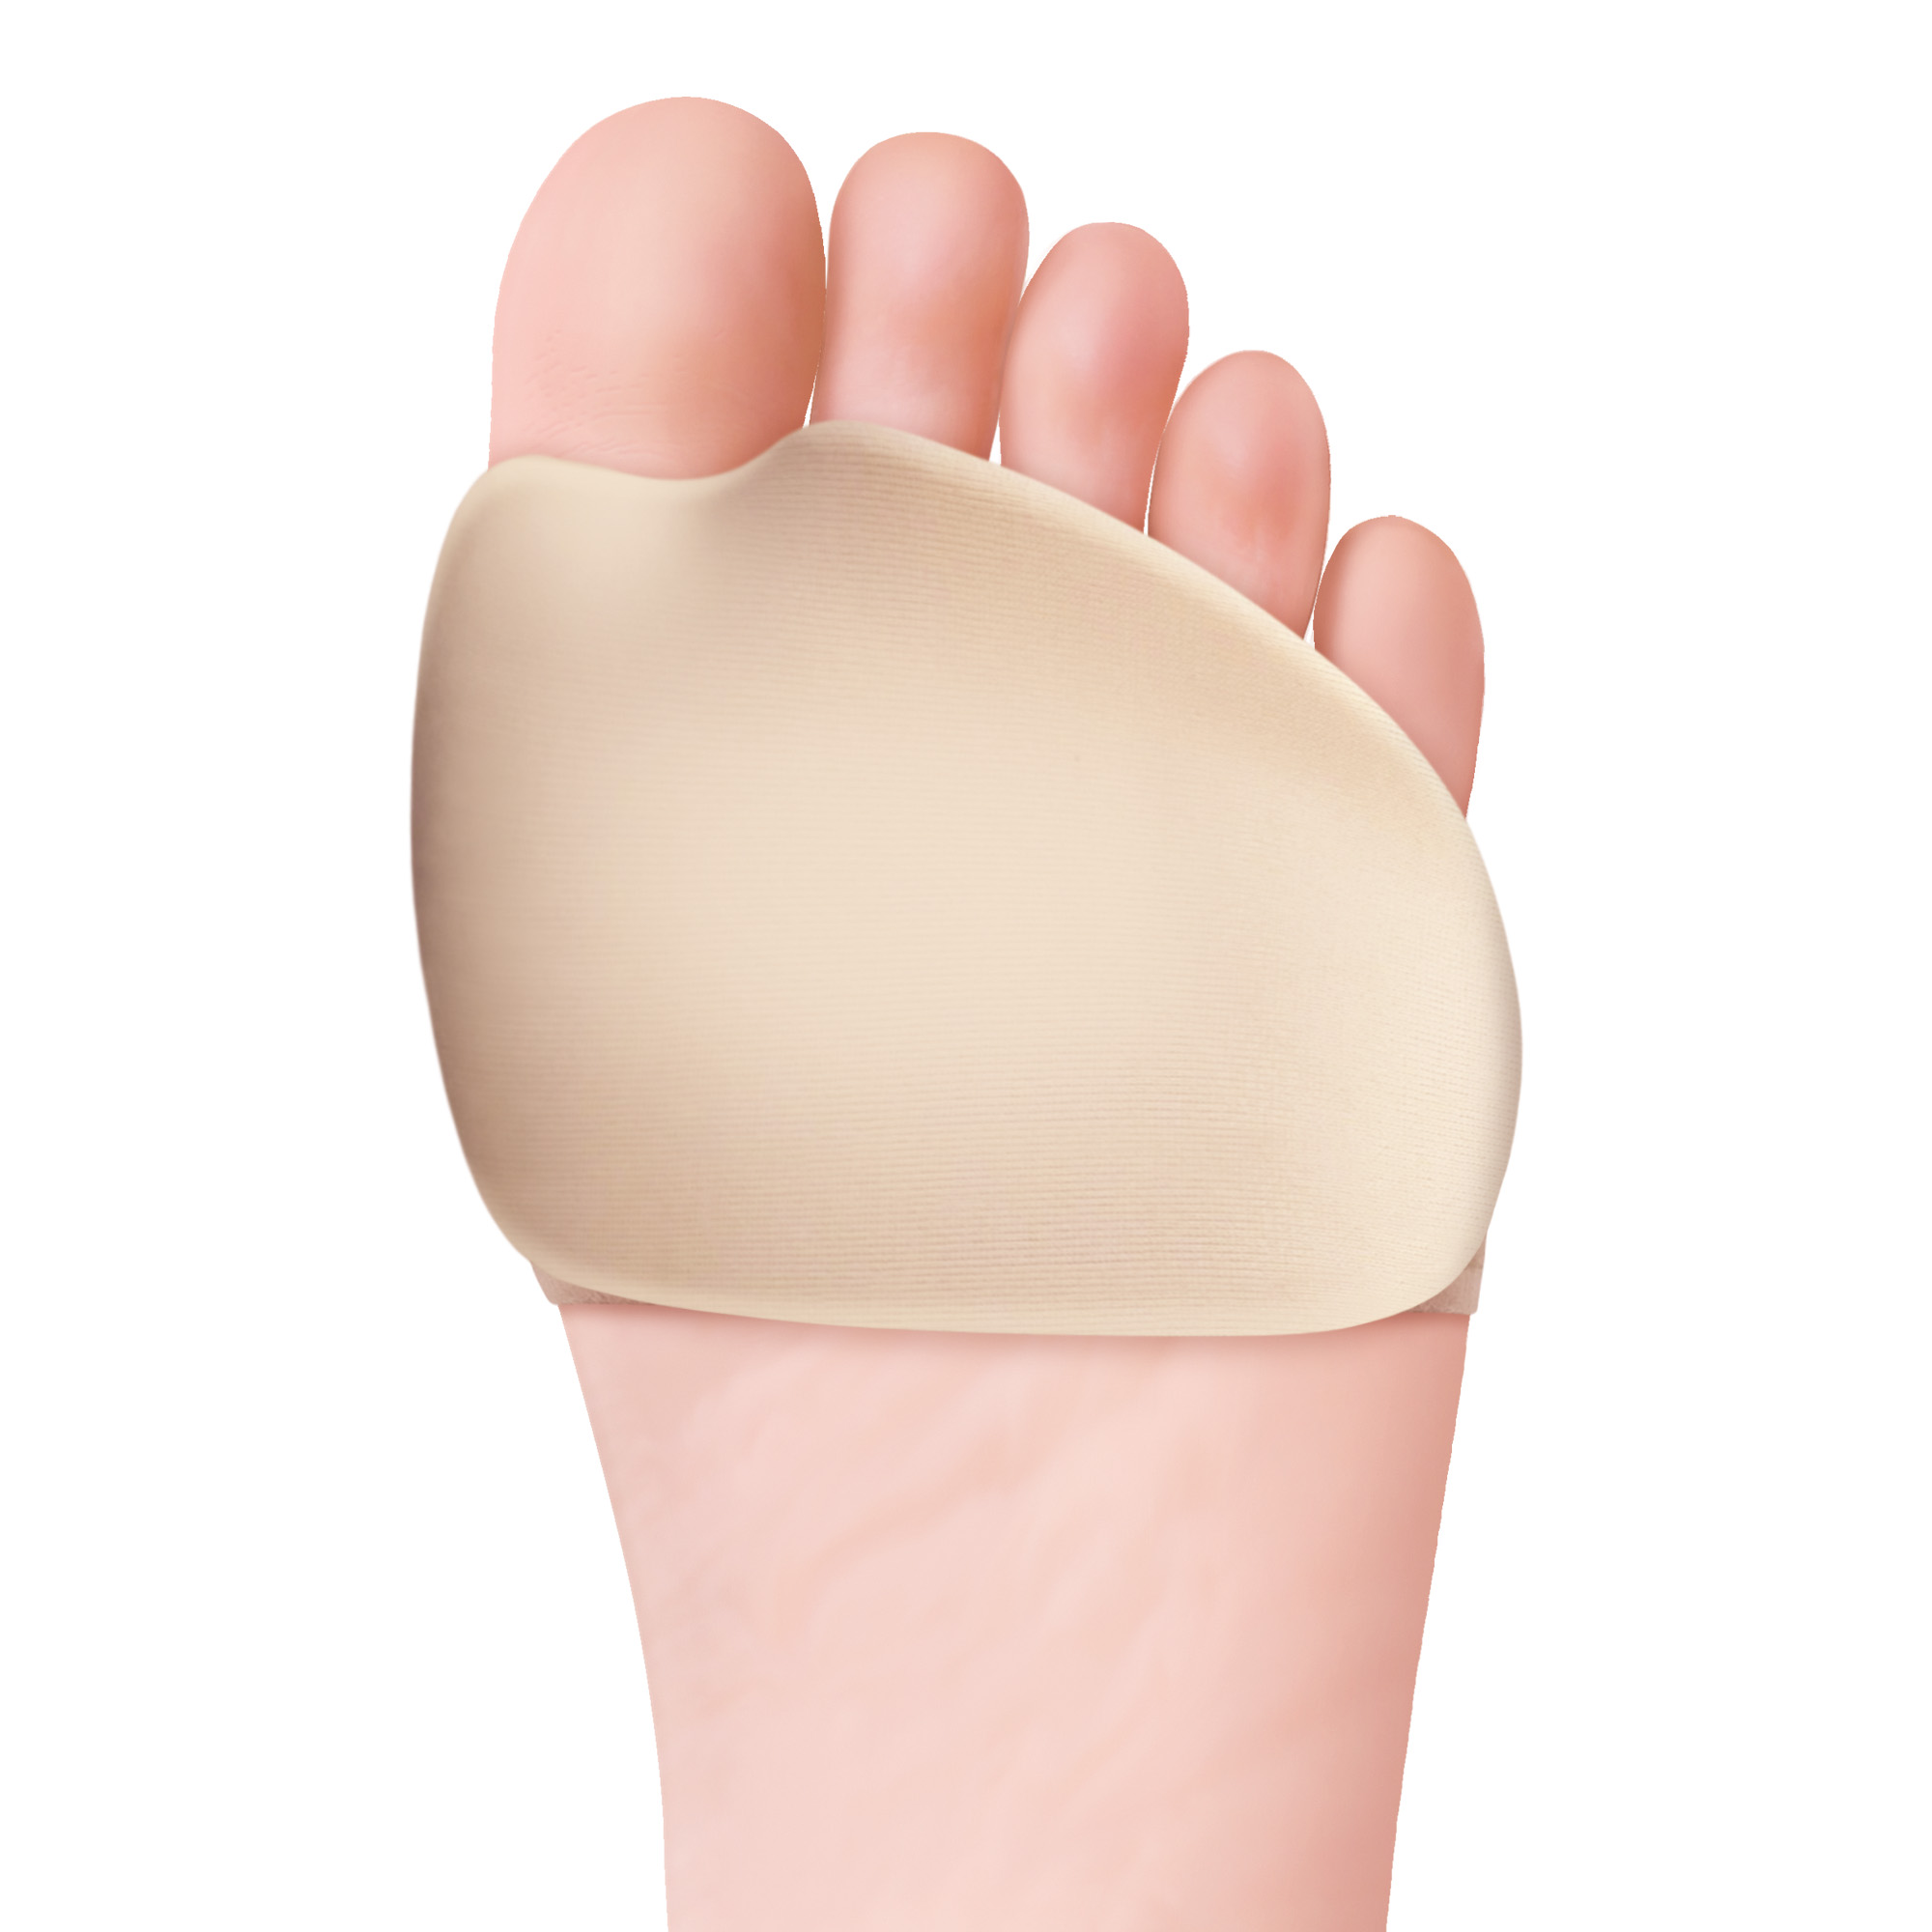 Forefoot and Bunion protection